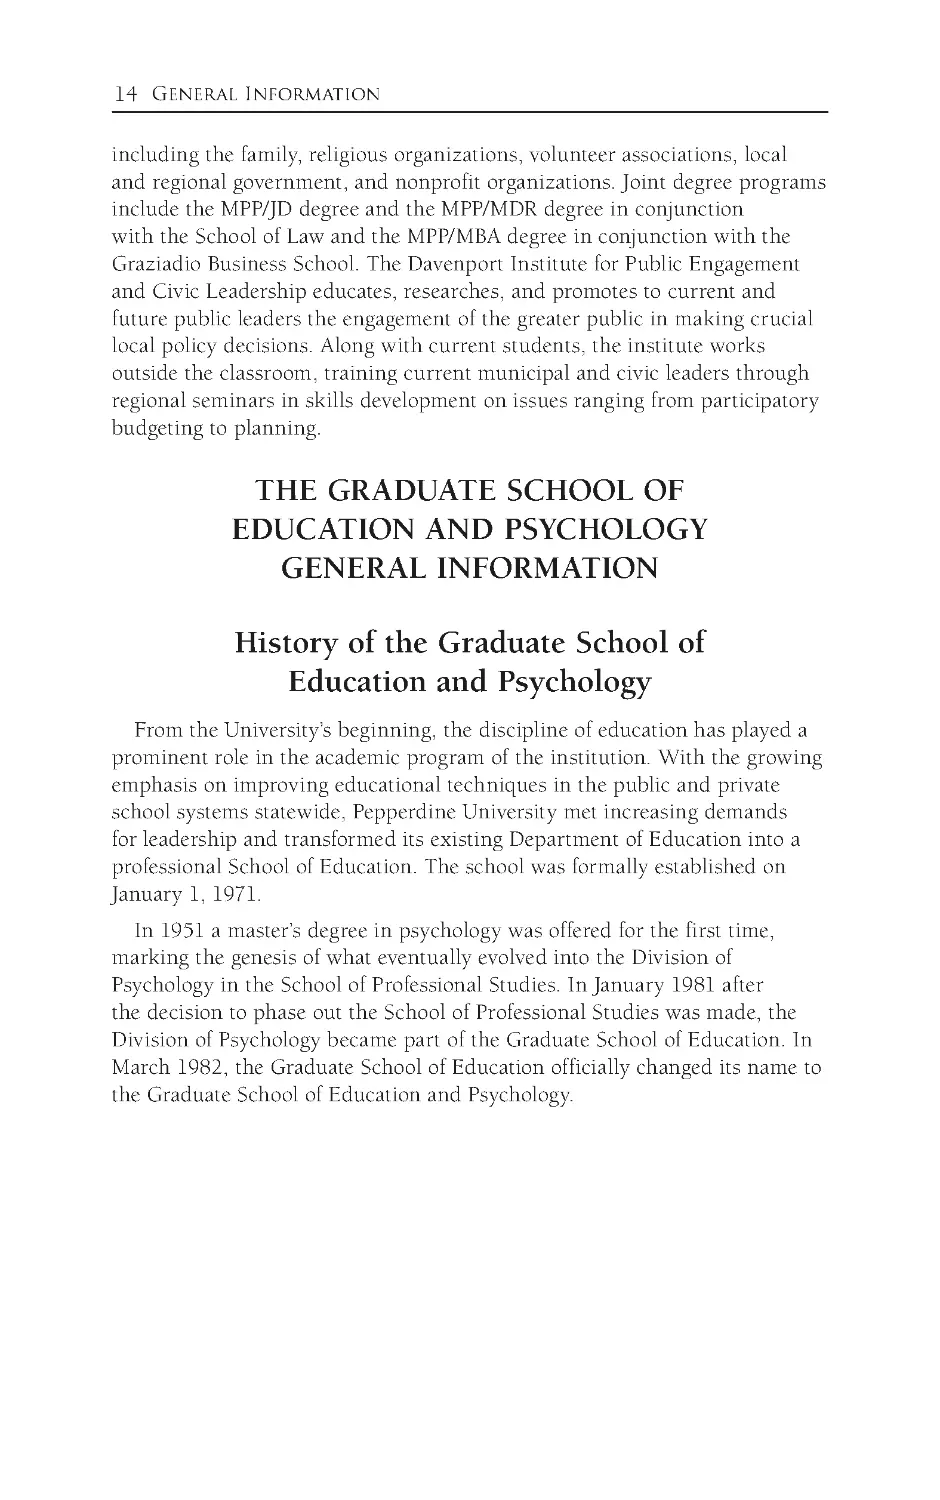 The Graduate School of Education and Psychology General information